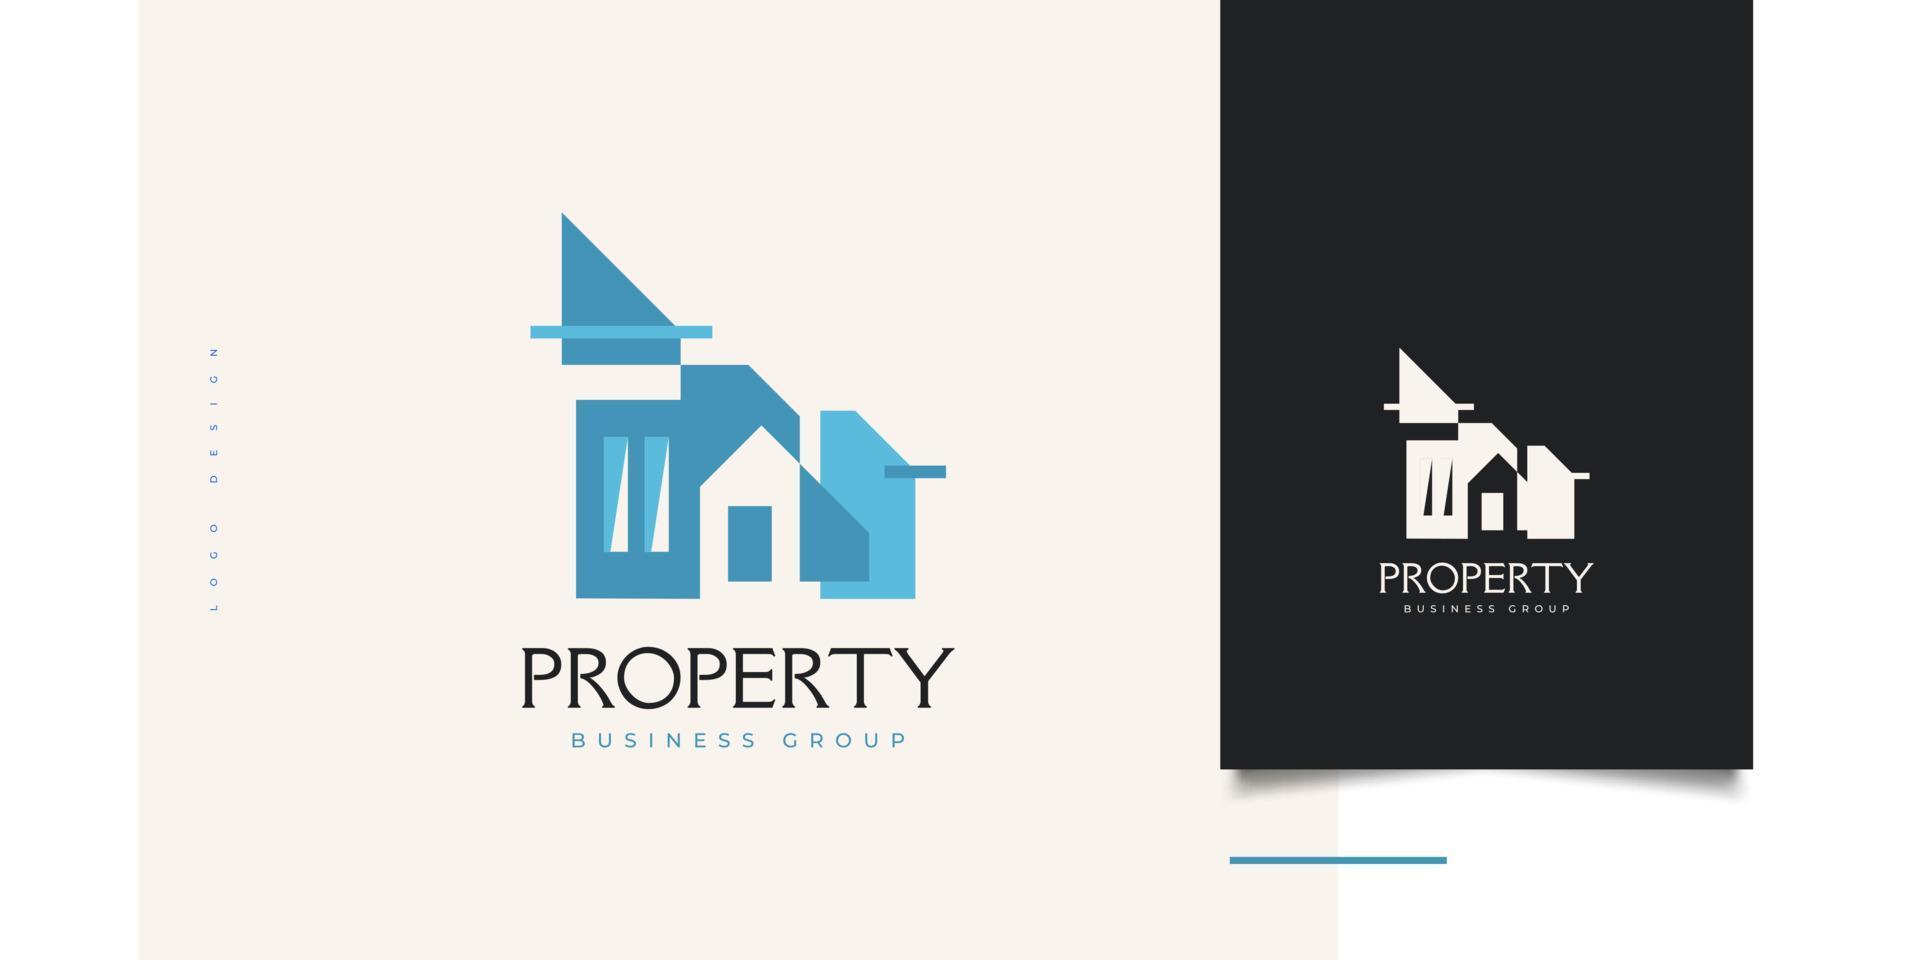 Modern and Minimalist House Logo Design for Real Estate Business Identity. Architecture or Construction Industry Logo vector